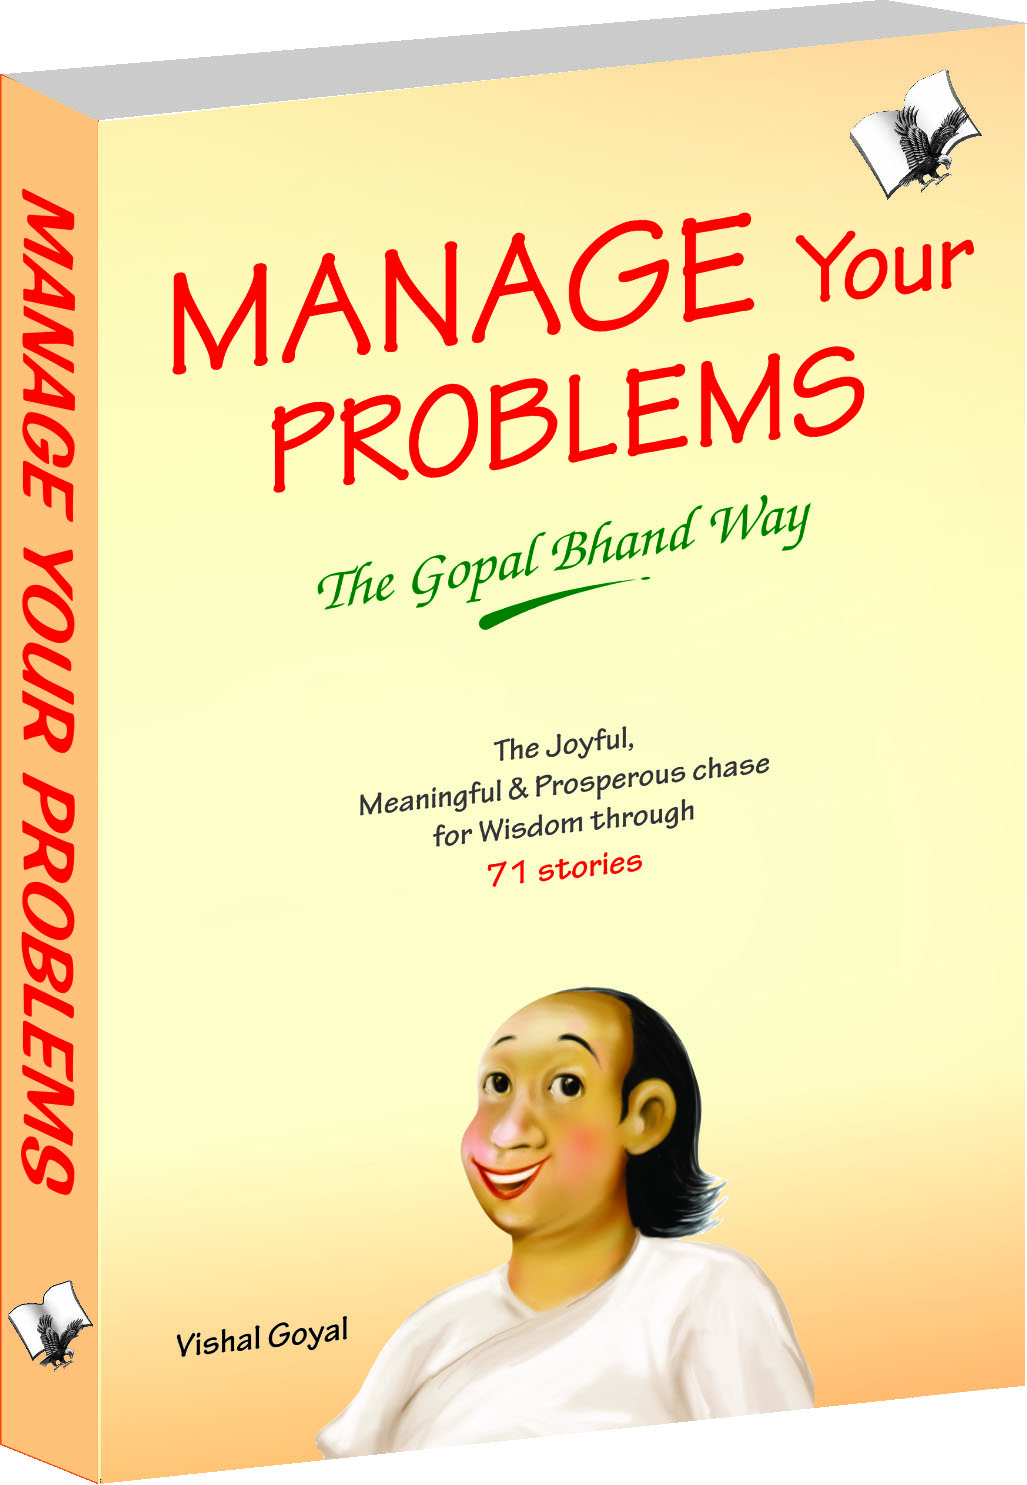 Manage Your Problems - The Gopal Bhand Way-The gopal bhand way